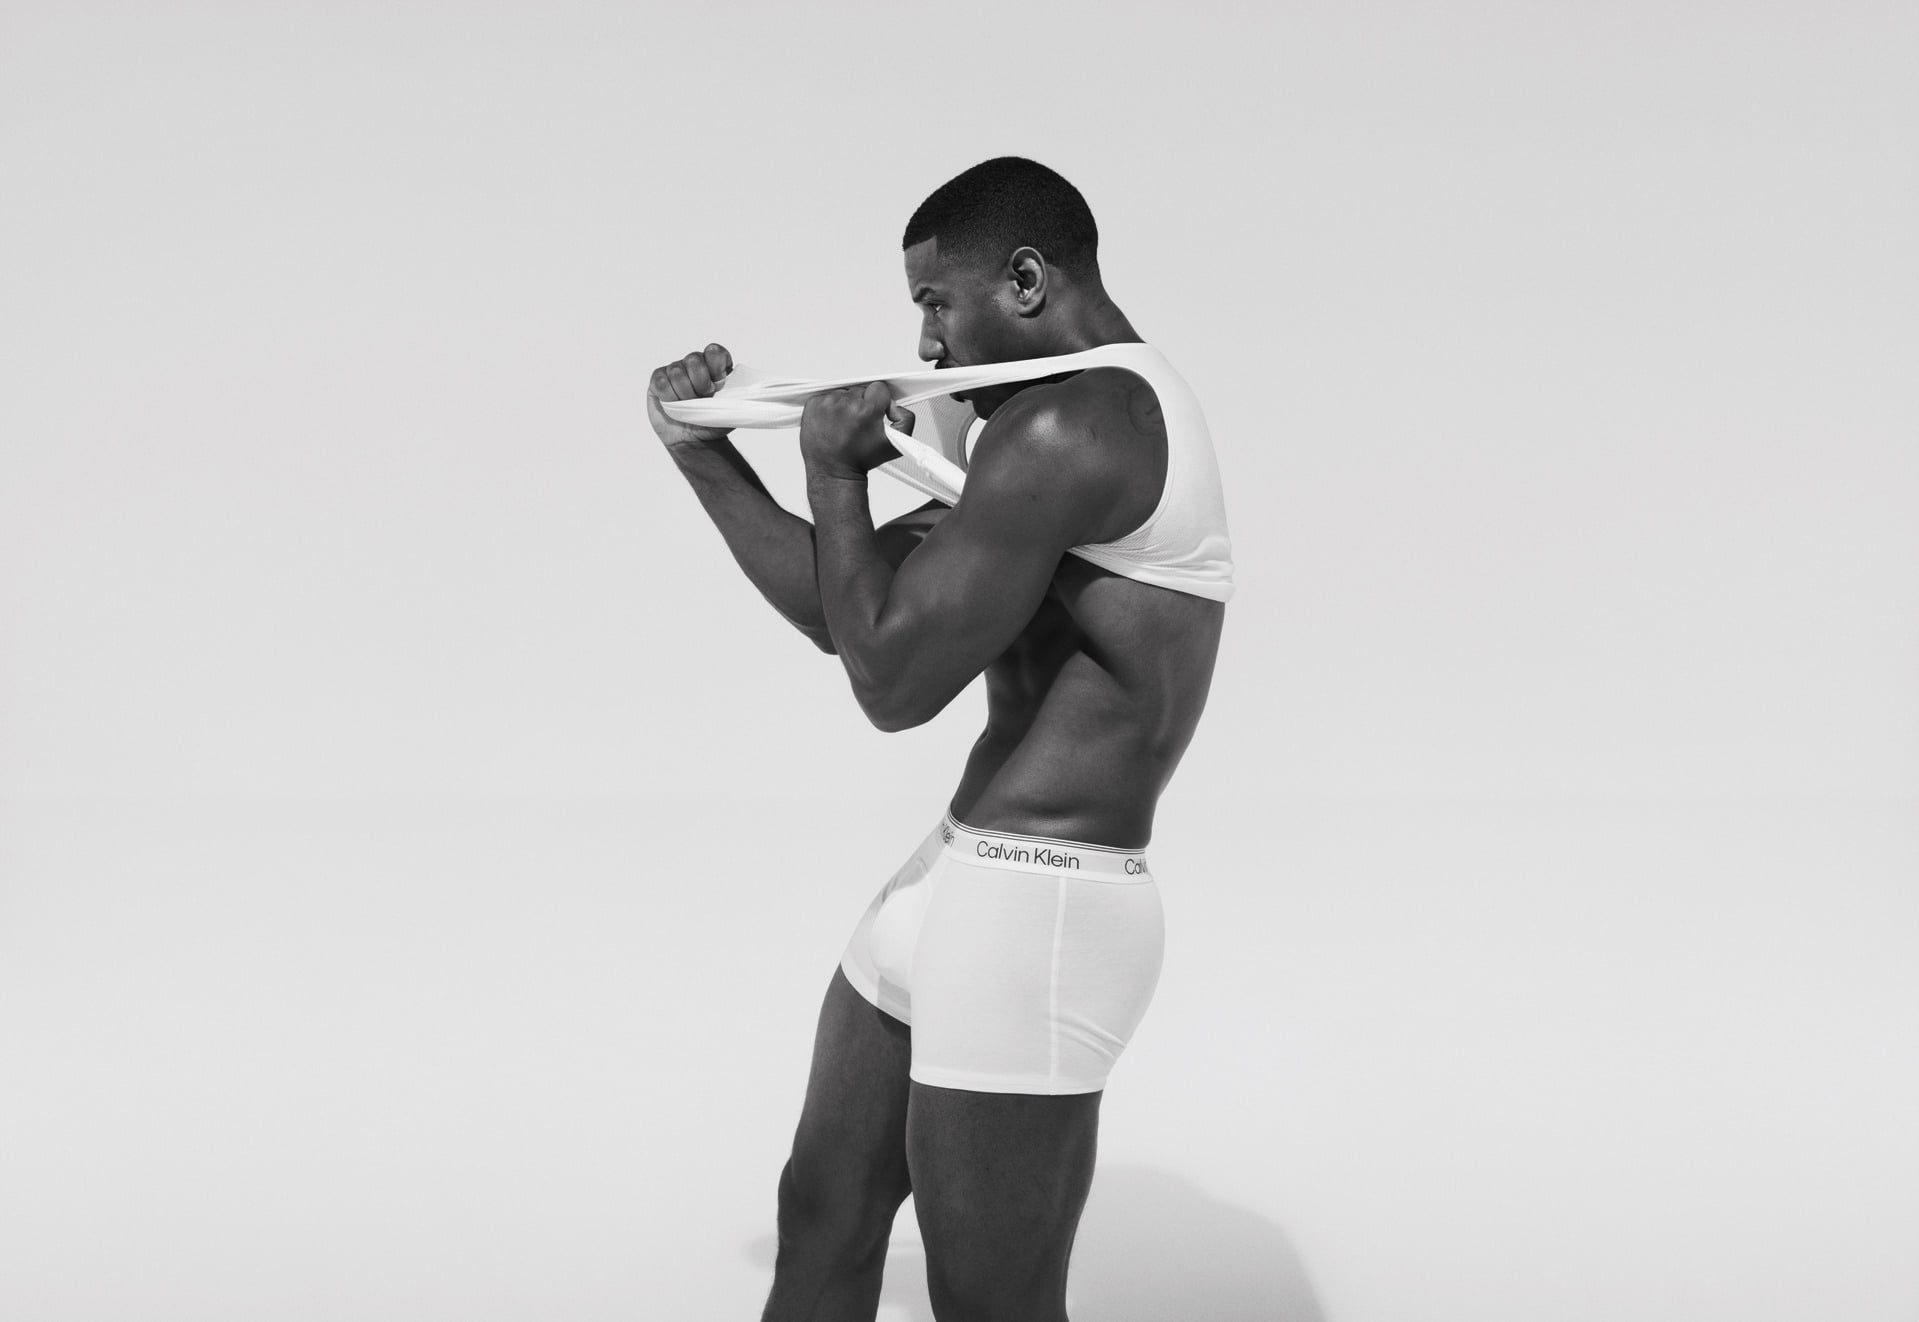 Calvin Klein to launch largest digital campaign to date, The Work